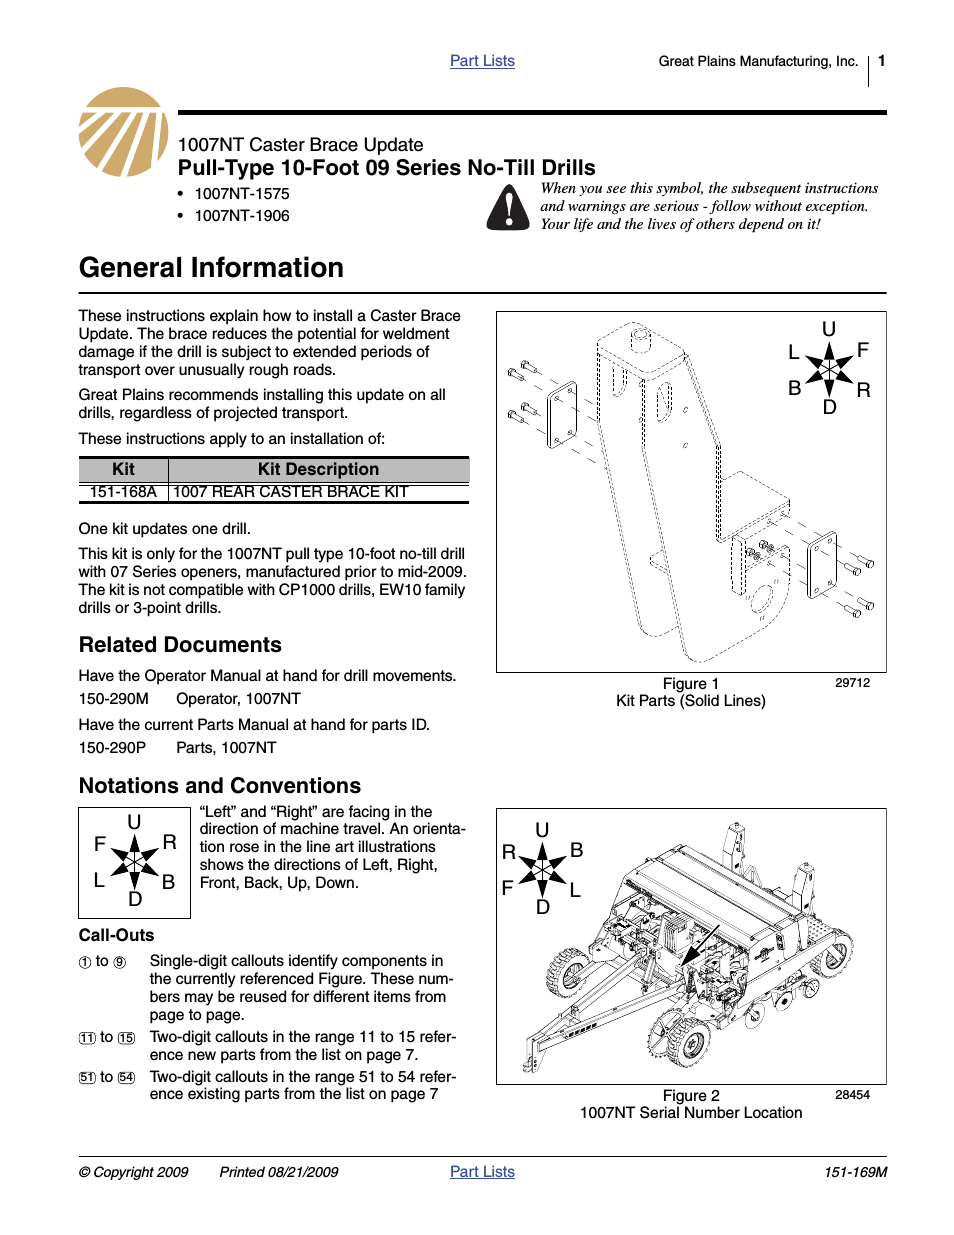 1007NT-1575 Assembly Instructions